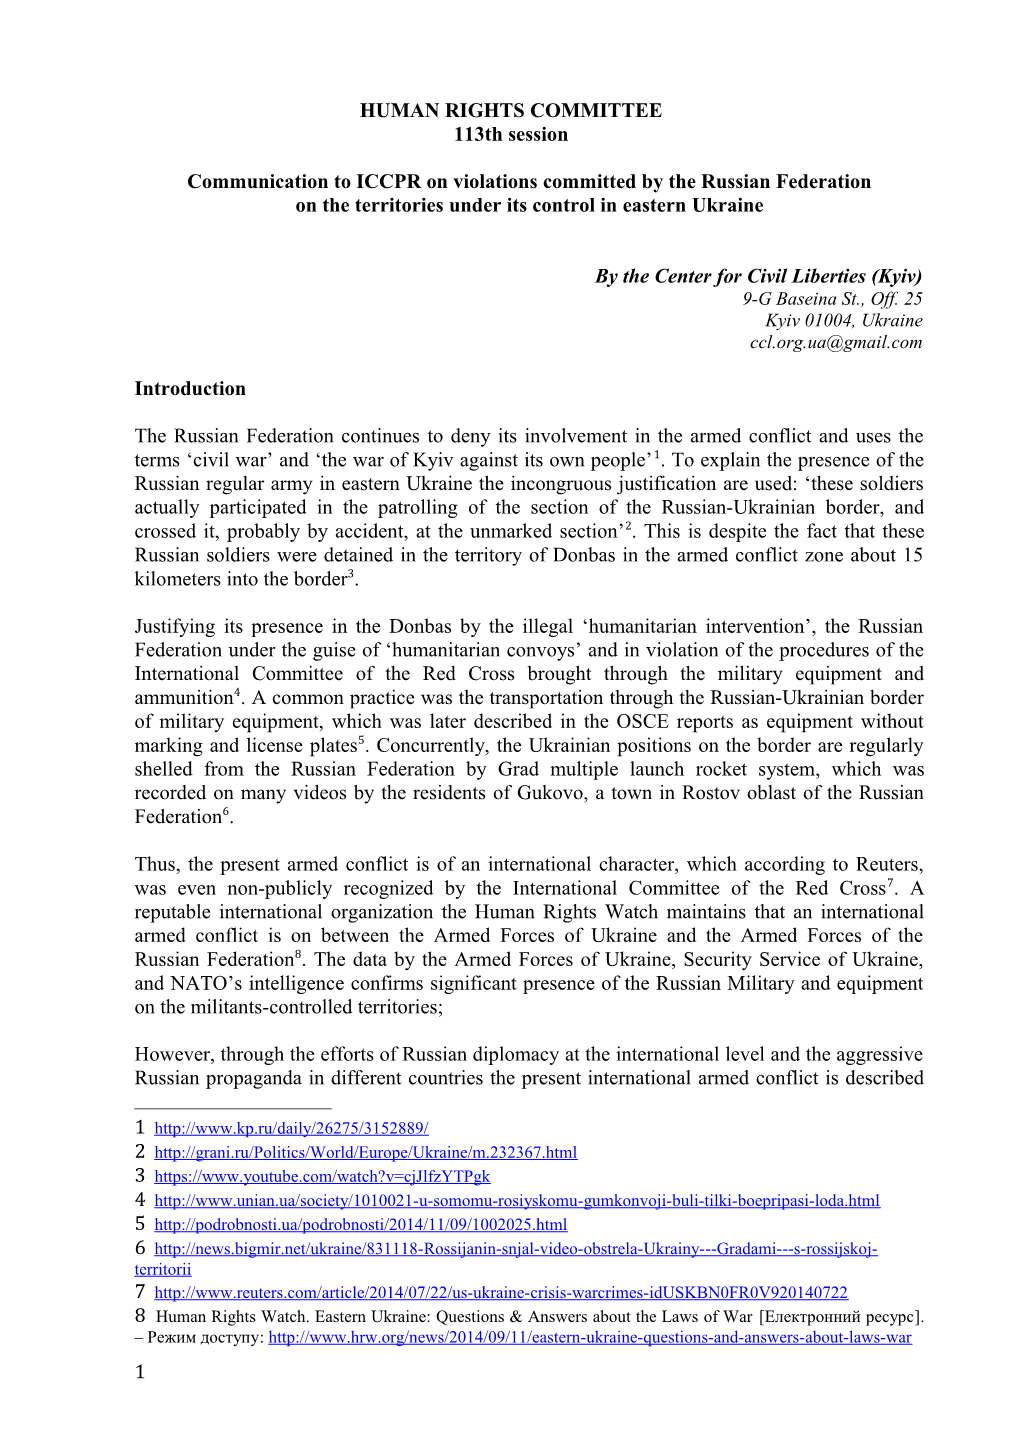 Communication to ICCPR on Violations Committed by the Russian Federation on the Territories